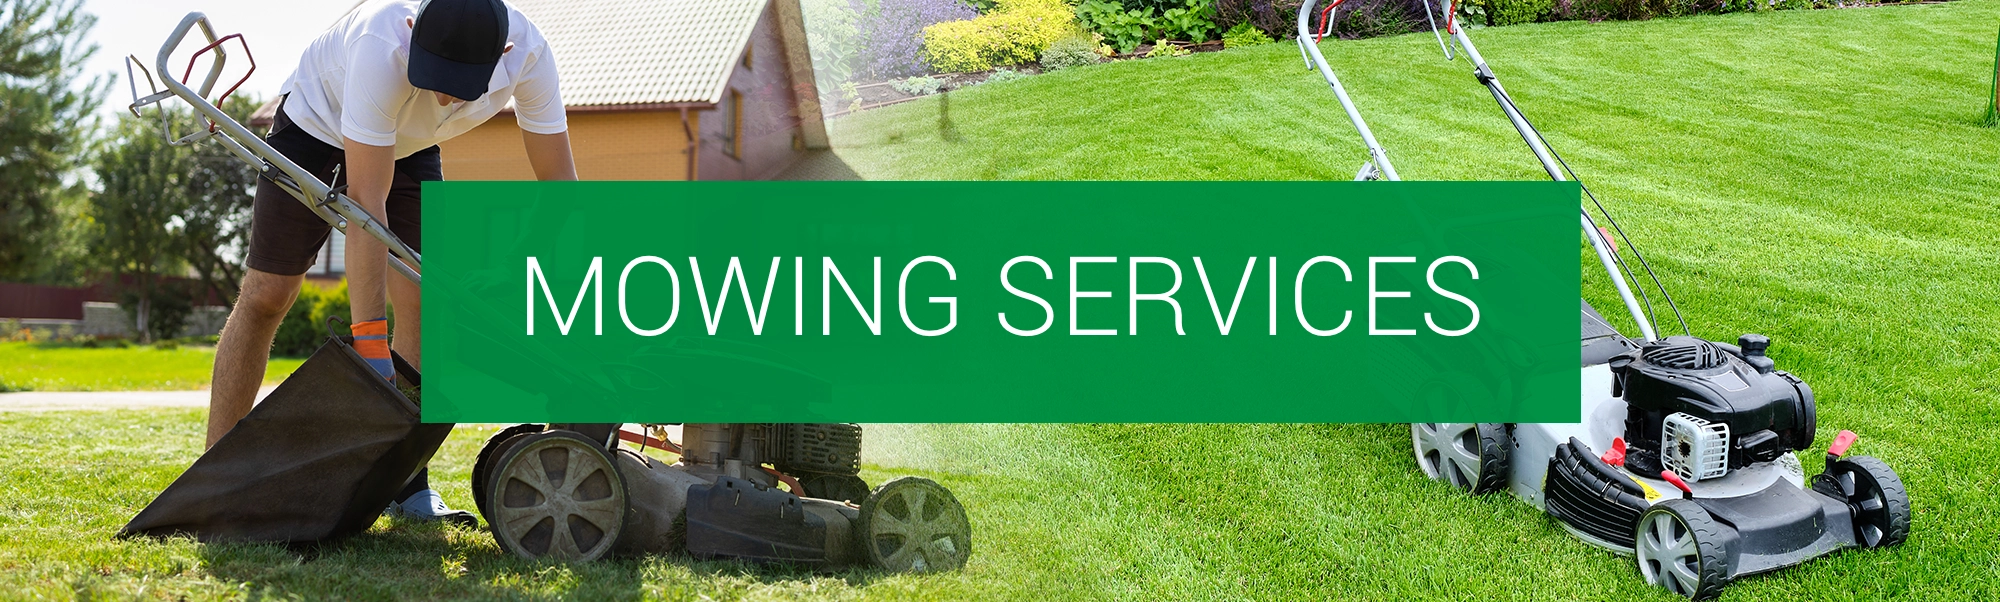 Lawn Care Services in South Carolina - Mowing